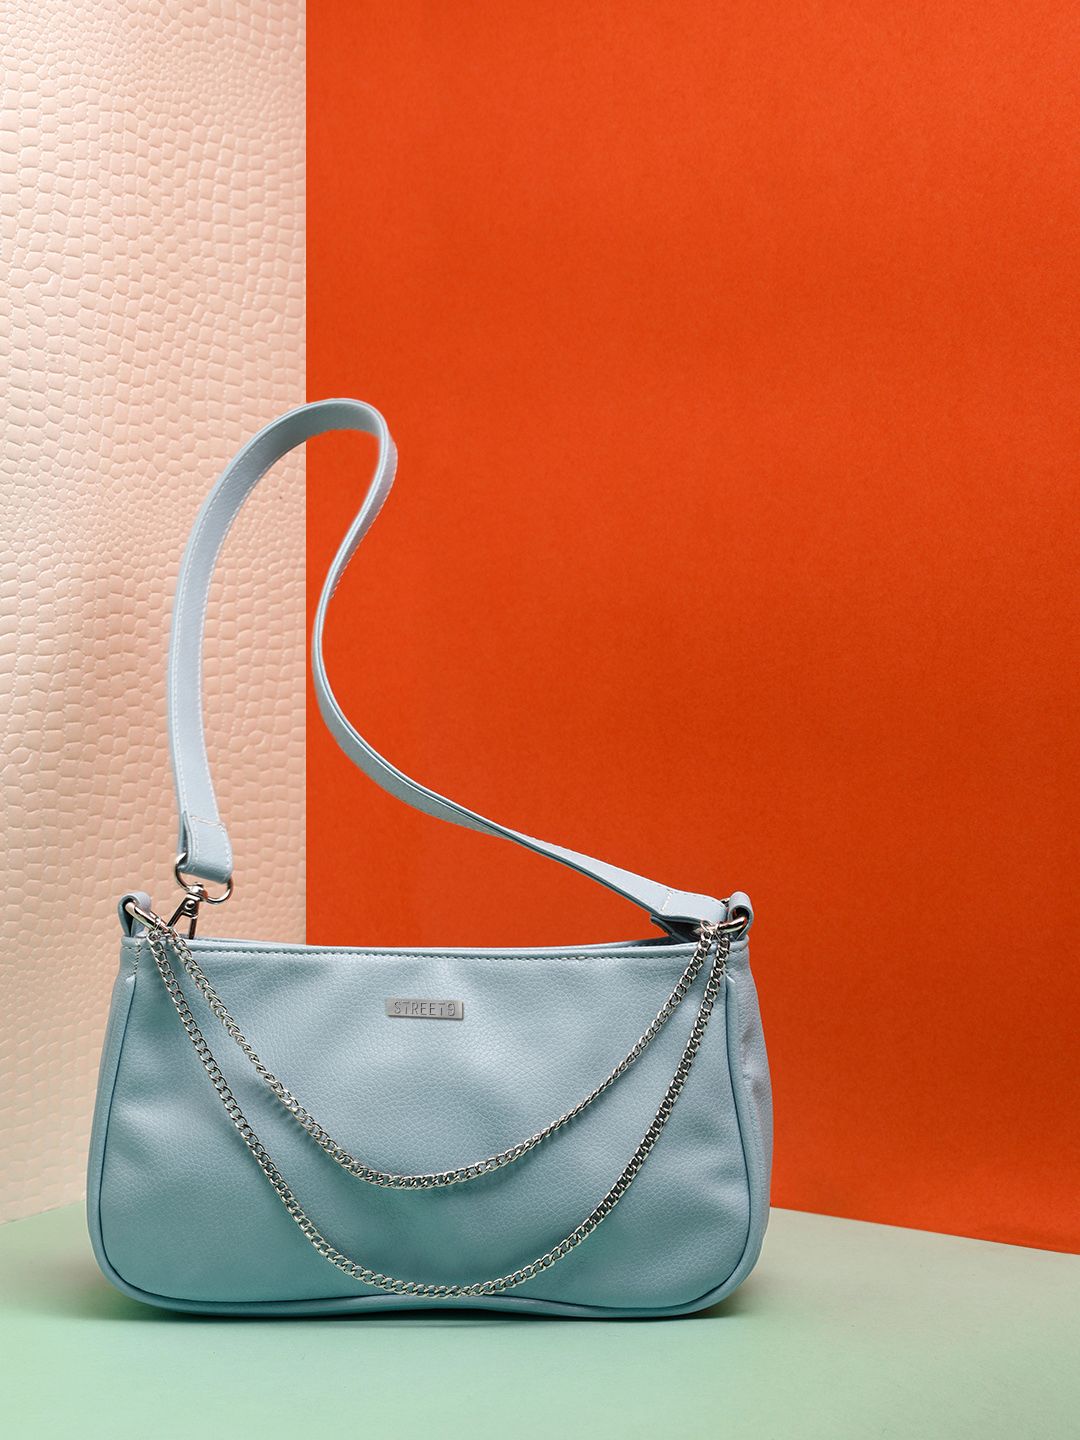 STREET 9 Turquoise Blue & Silver-Toned Solid Sling Bag Price in India